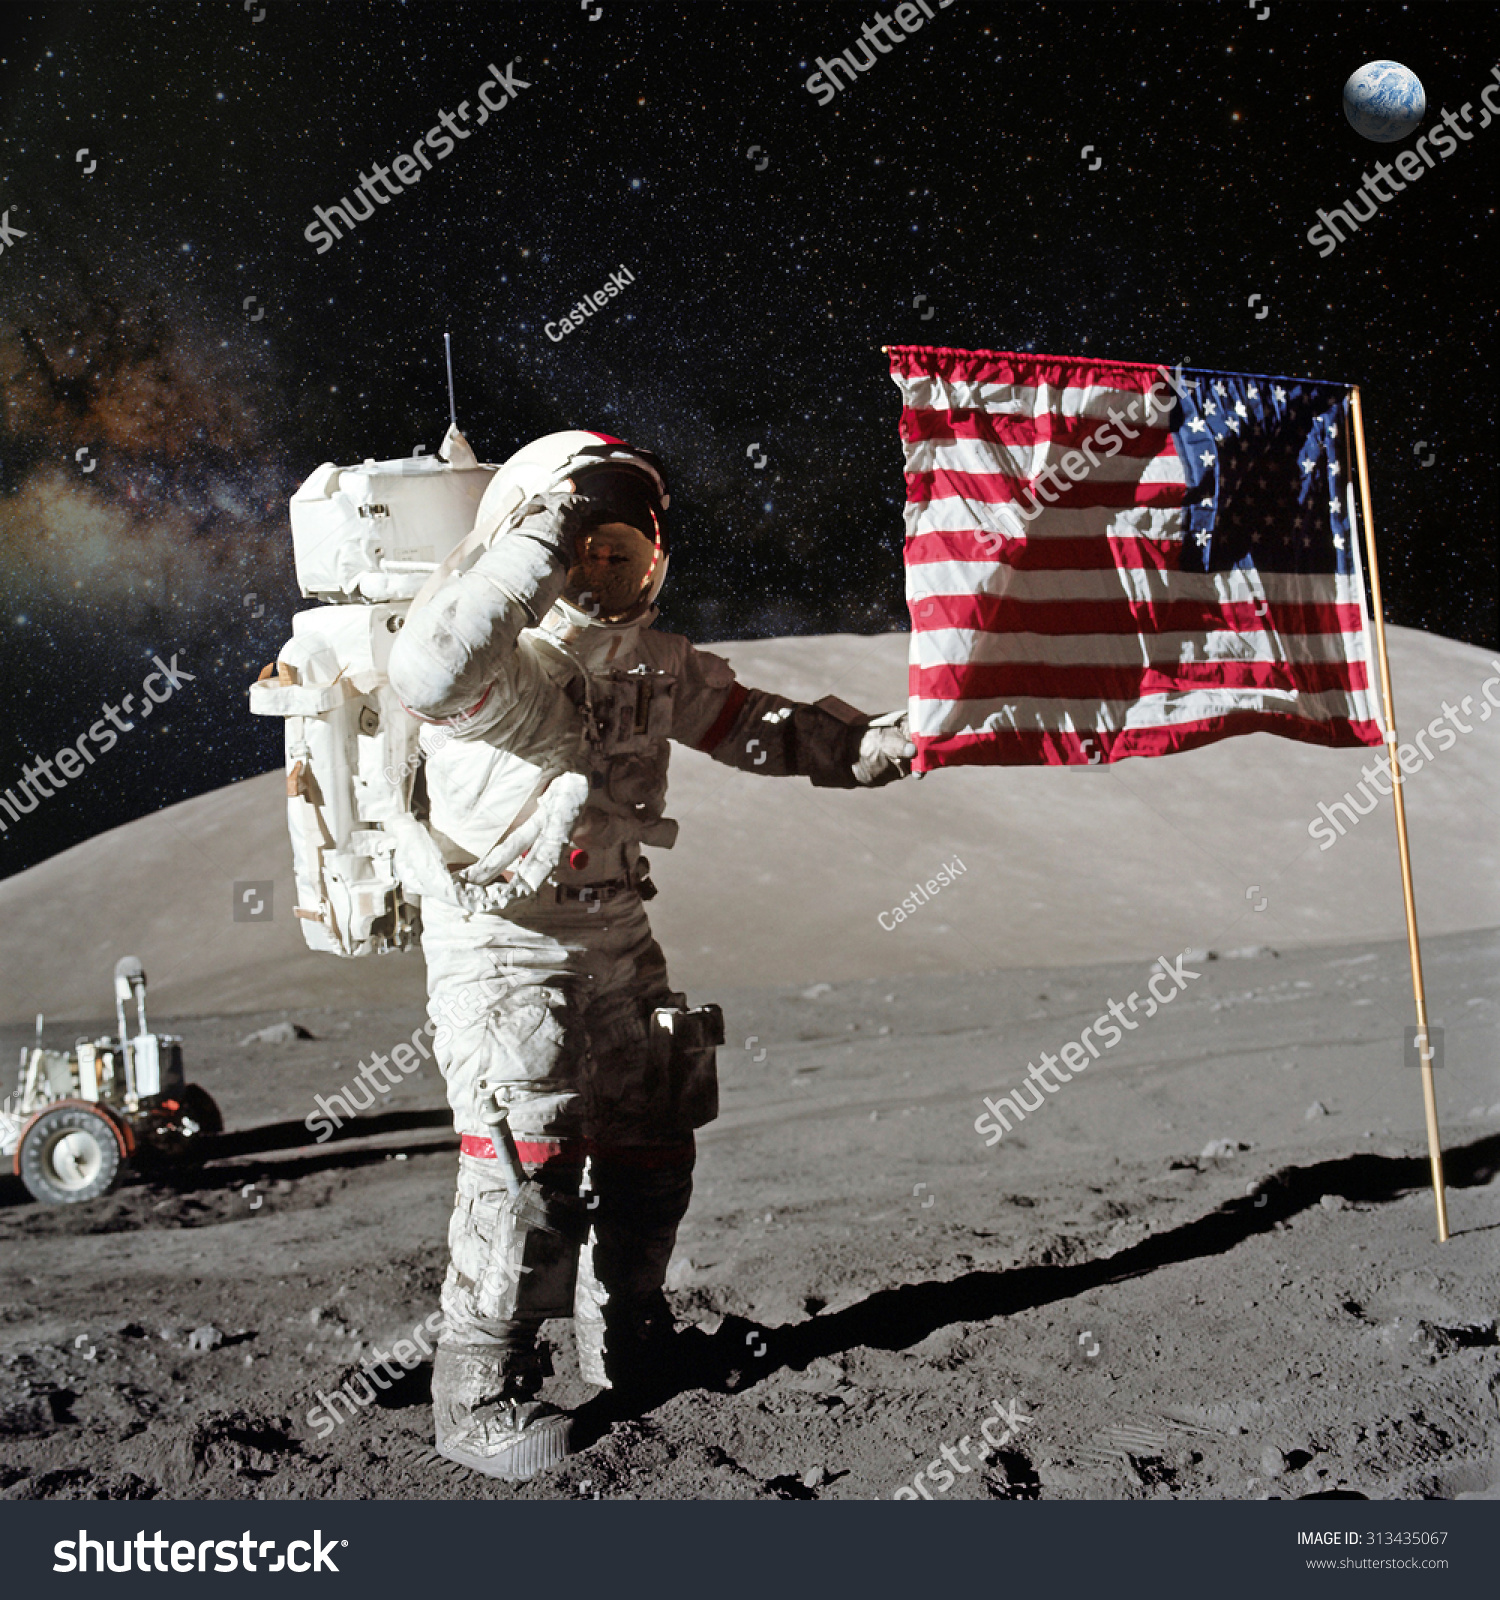 Astronaut on lunar (moon) landing mission. Elements of this image furnished by NASA. #313435067